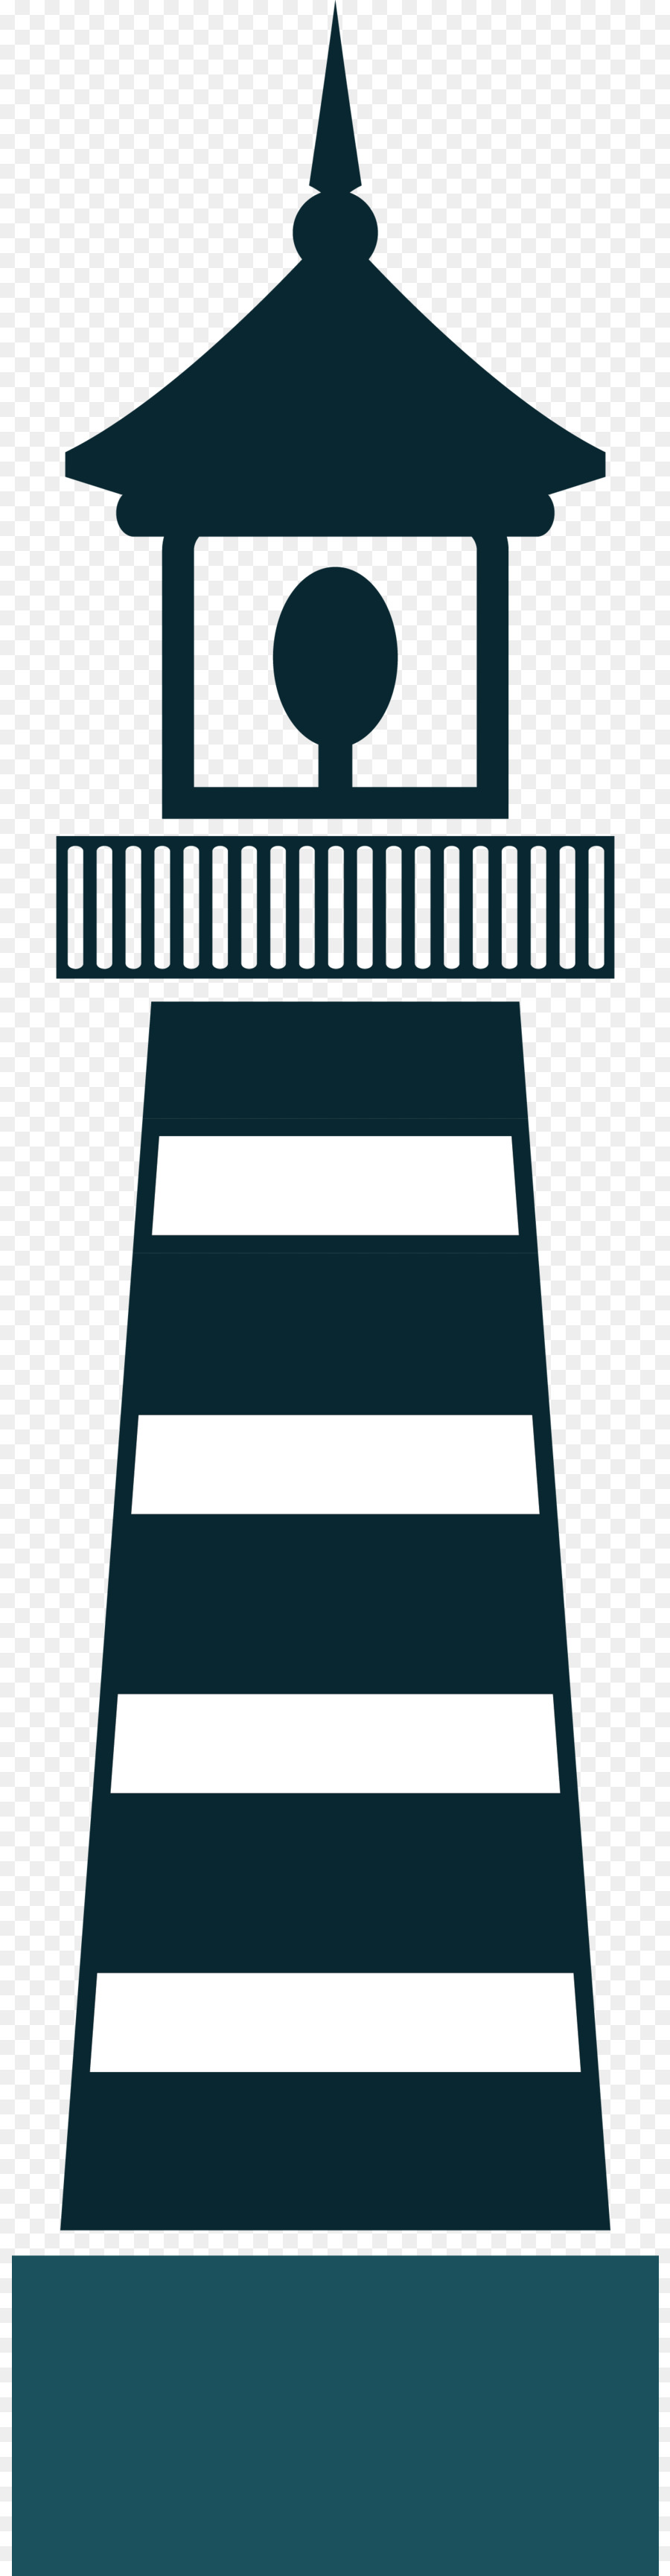 Silhouette Lighthouse - Lighthouse Silhouette Vector png download - 1231*4902 - Free Transparent Silhouette png Download.